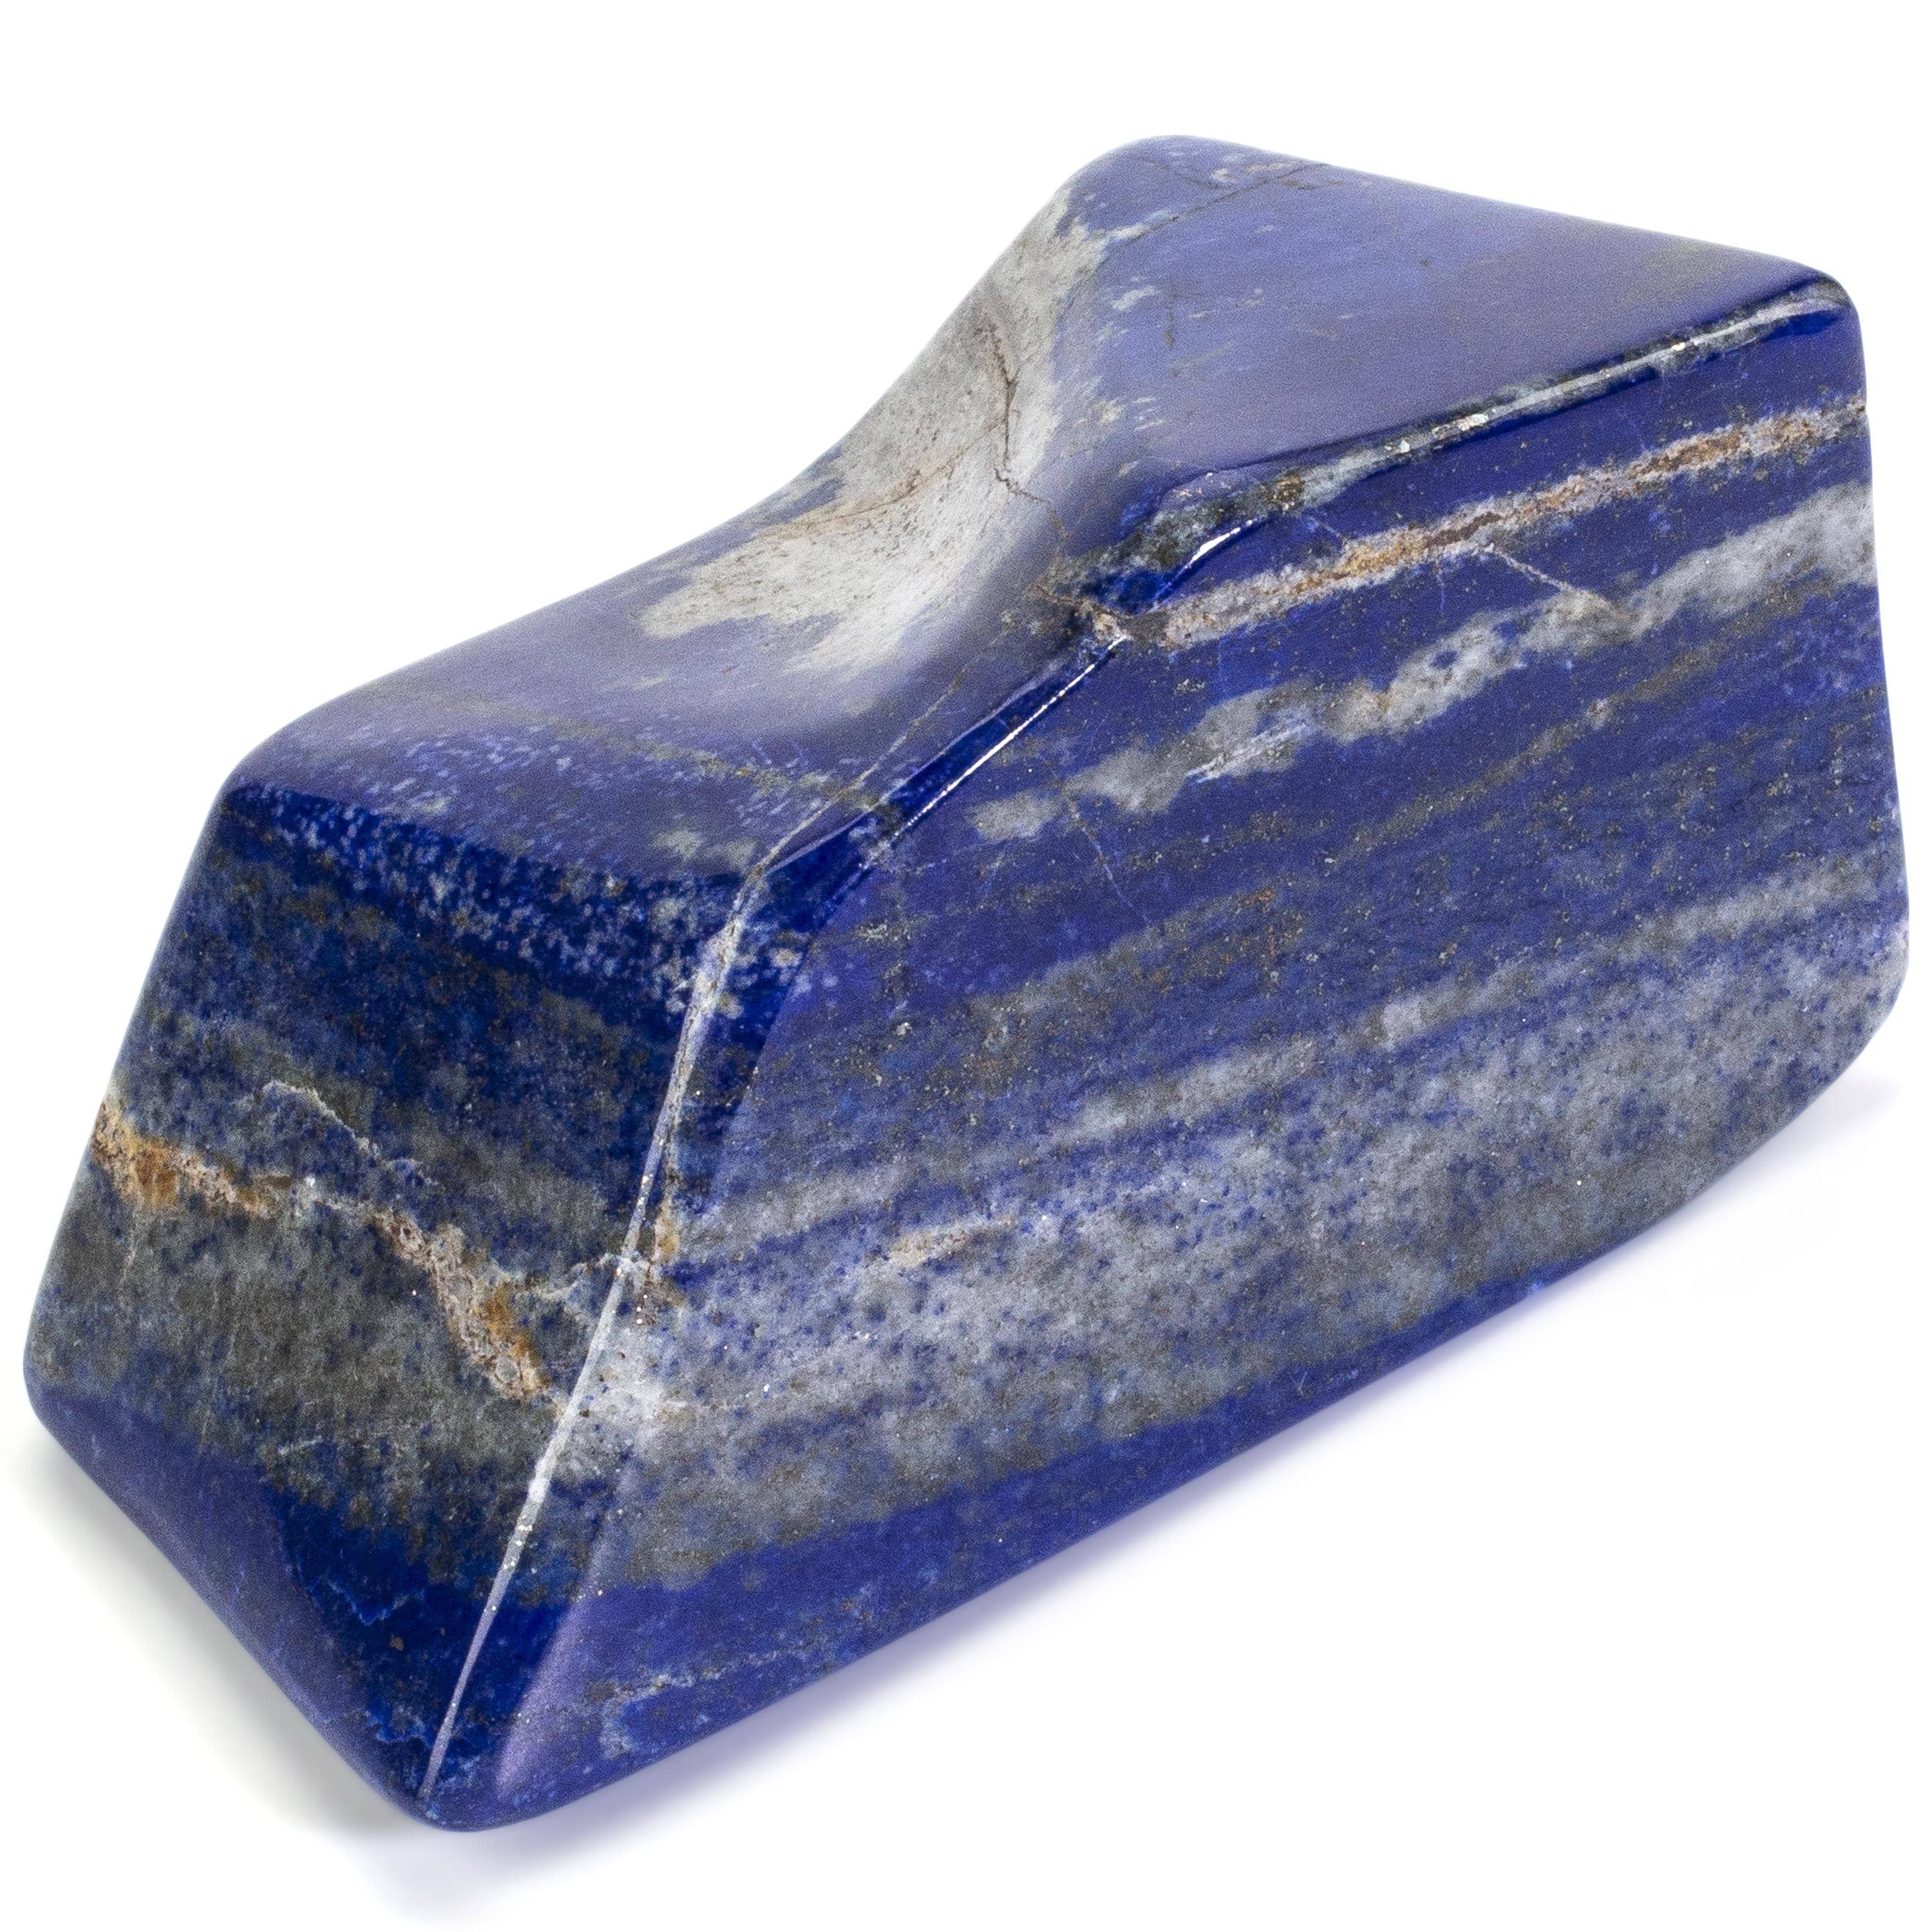 Kalifano Lapis Lapis Lazuil Freeform from Afghanistan - 390 g / 0.9 lbs LP500.002